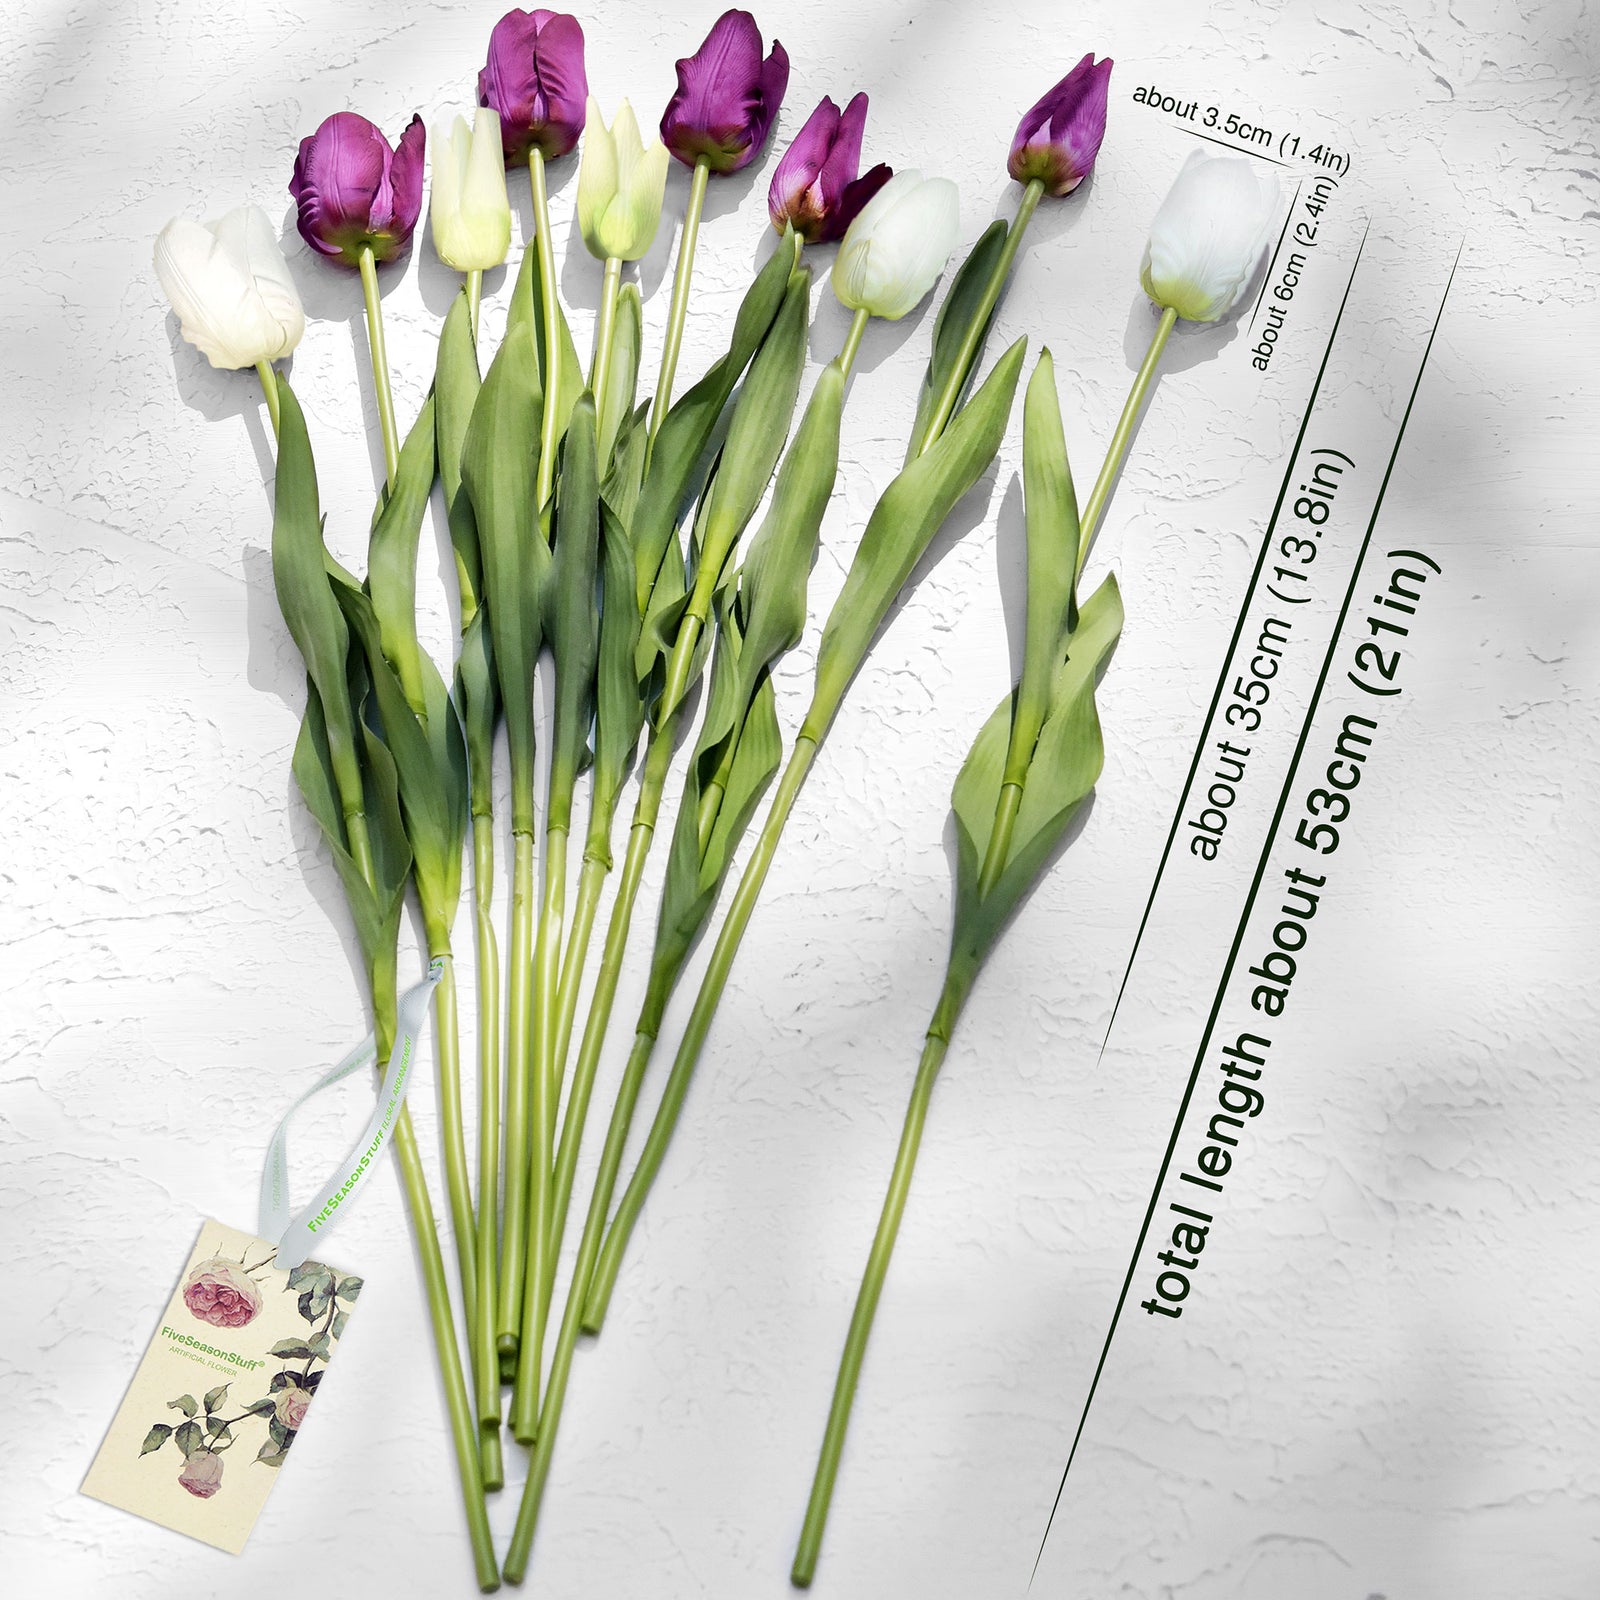 FiveSeasonStuff 10 Stems of (White & Purple) Soft and Long Stem Real Touch Tulip Artificial Flowers Bouquet, Wedding, Bridal, Home Decor (Dreamy Innocence)